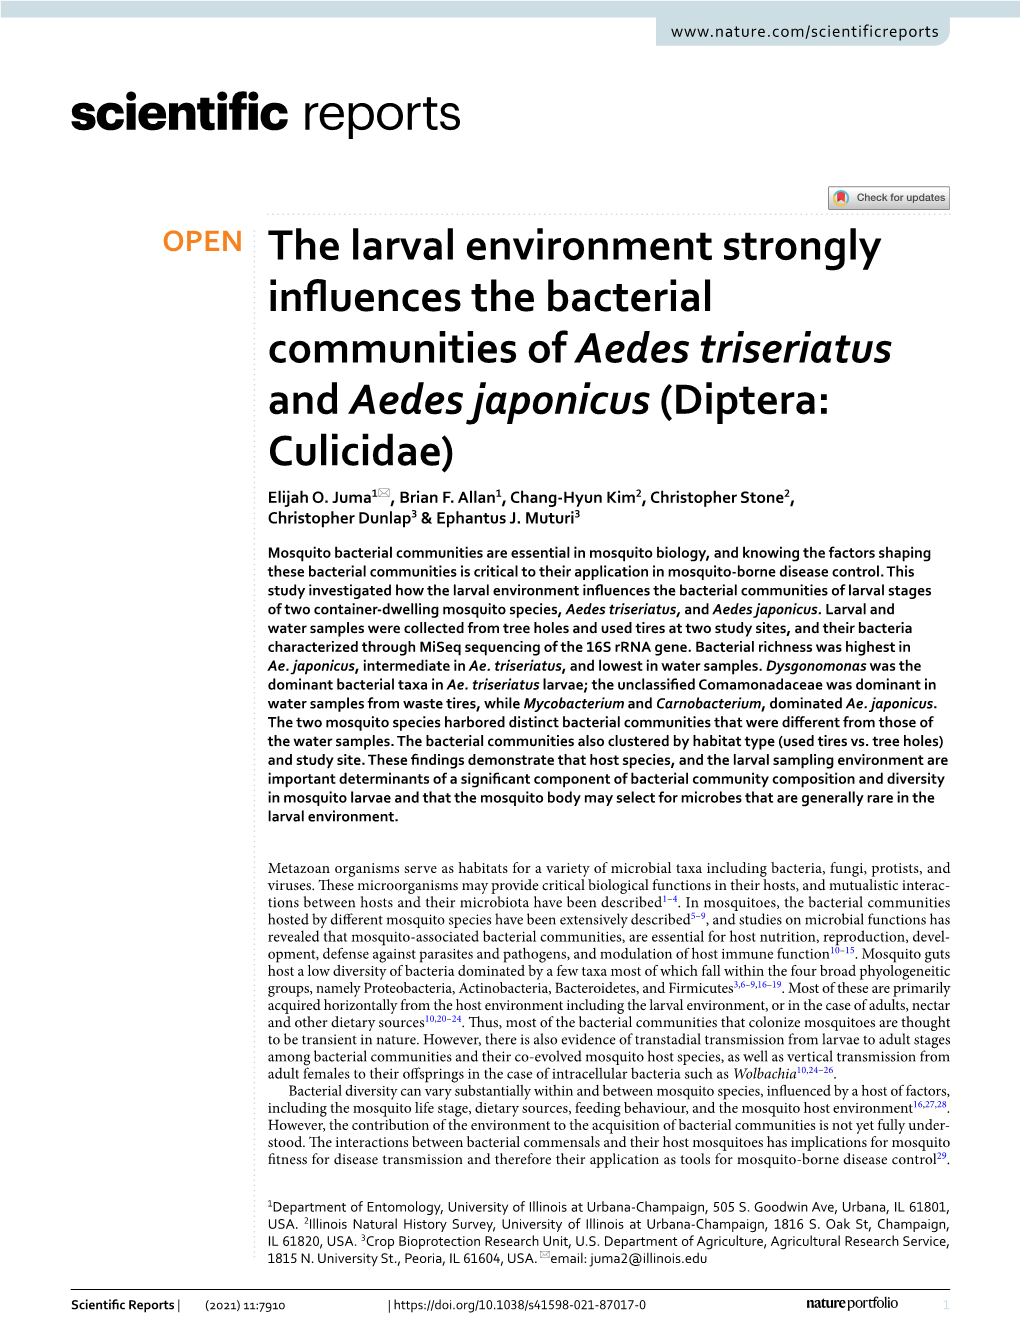 The Larval Environment Strongly Influences the Bacterial